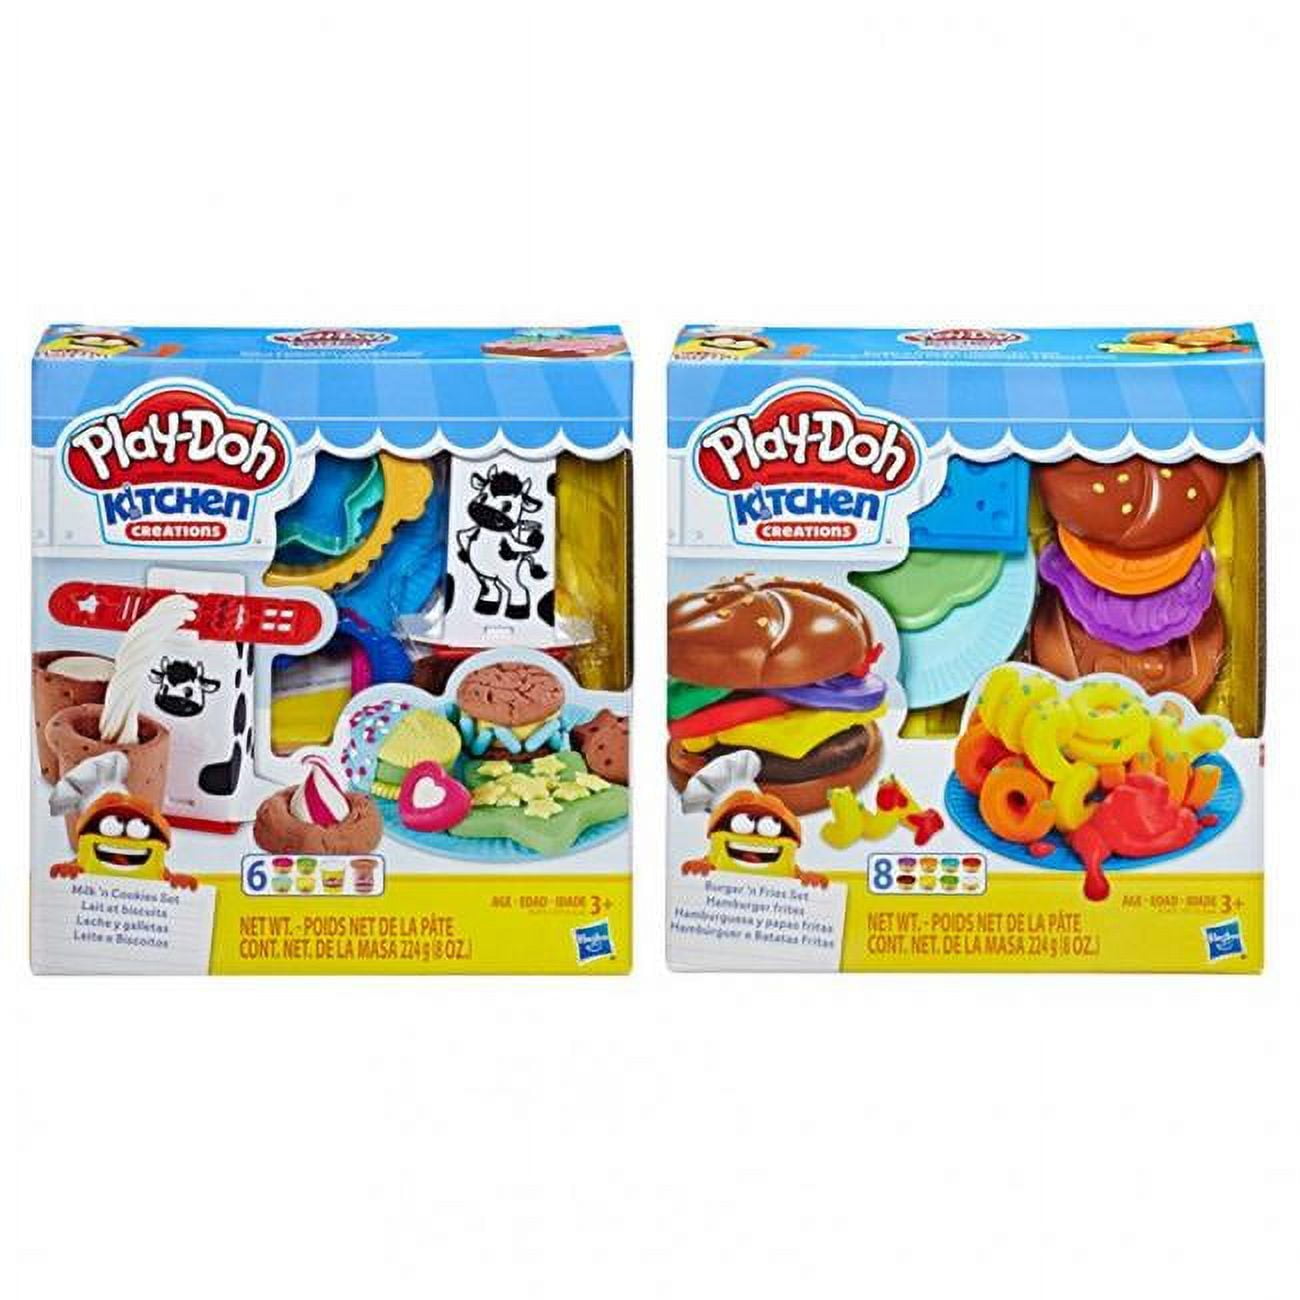 Play-Doh Kitchen Creations Milk and Cookies Set with 6 Colors